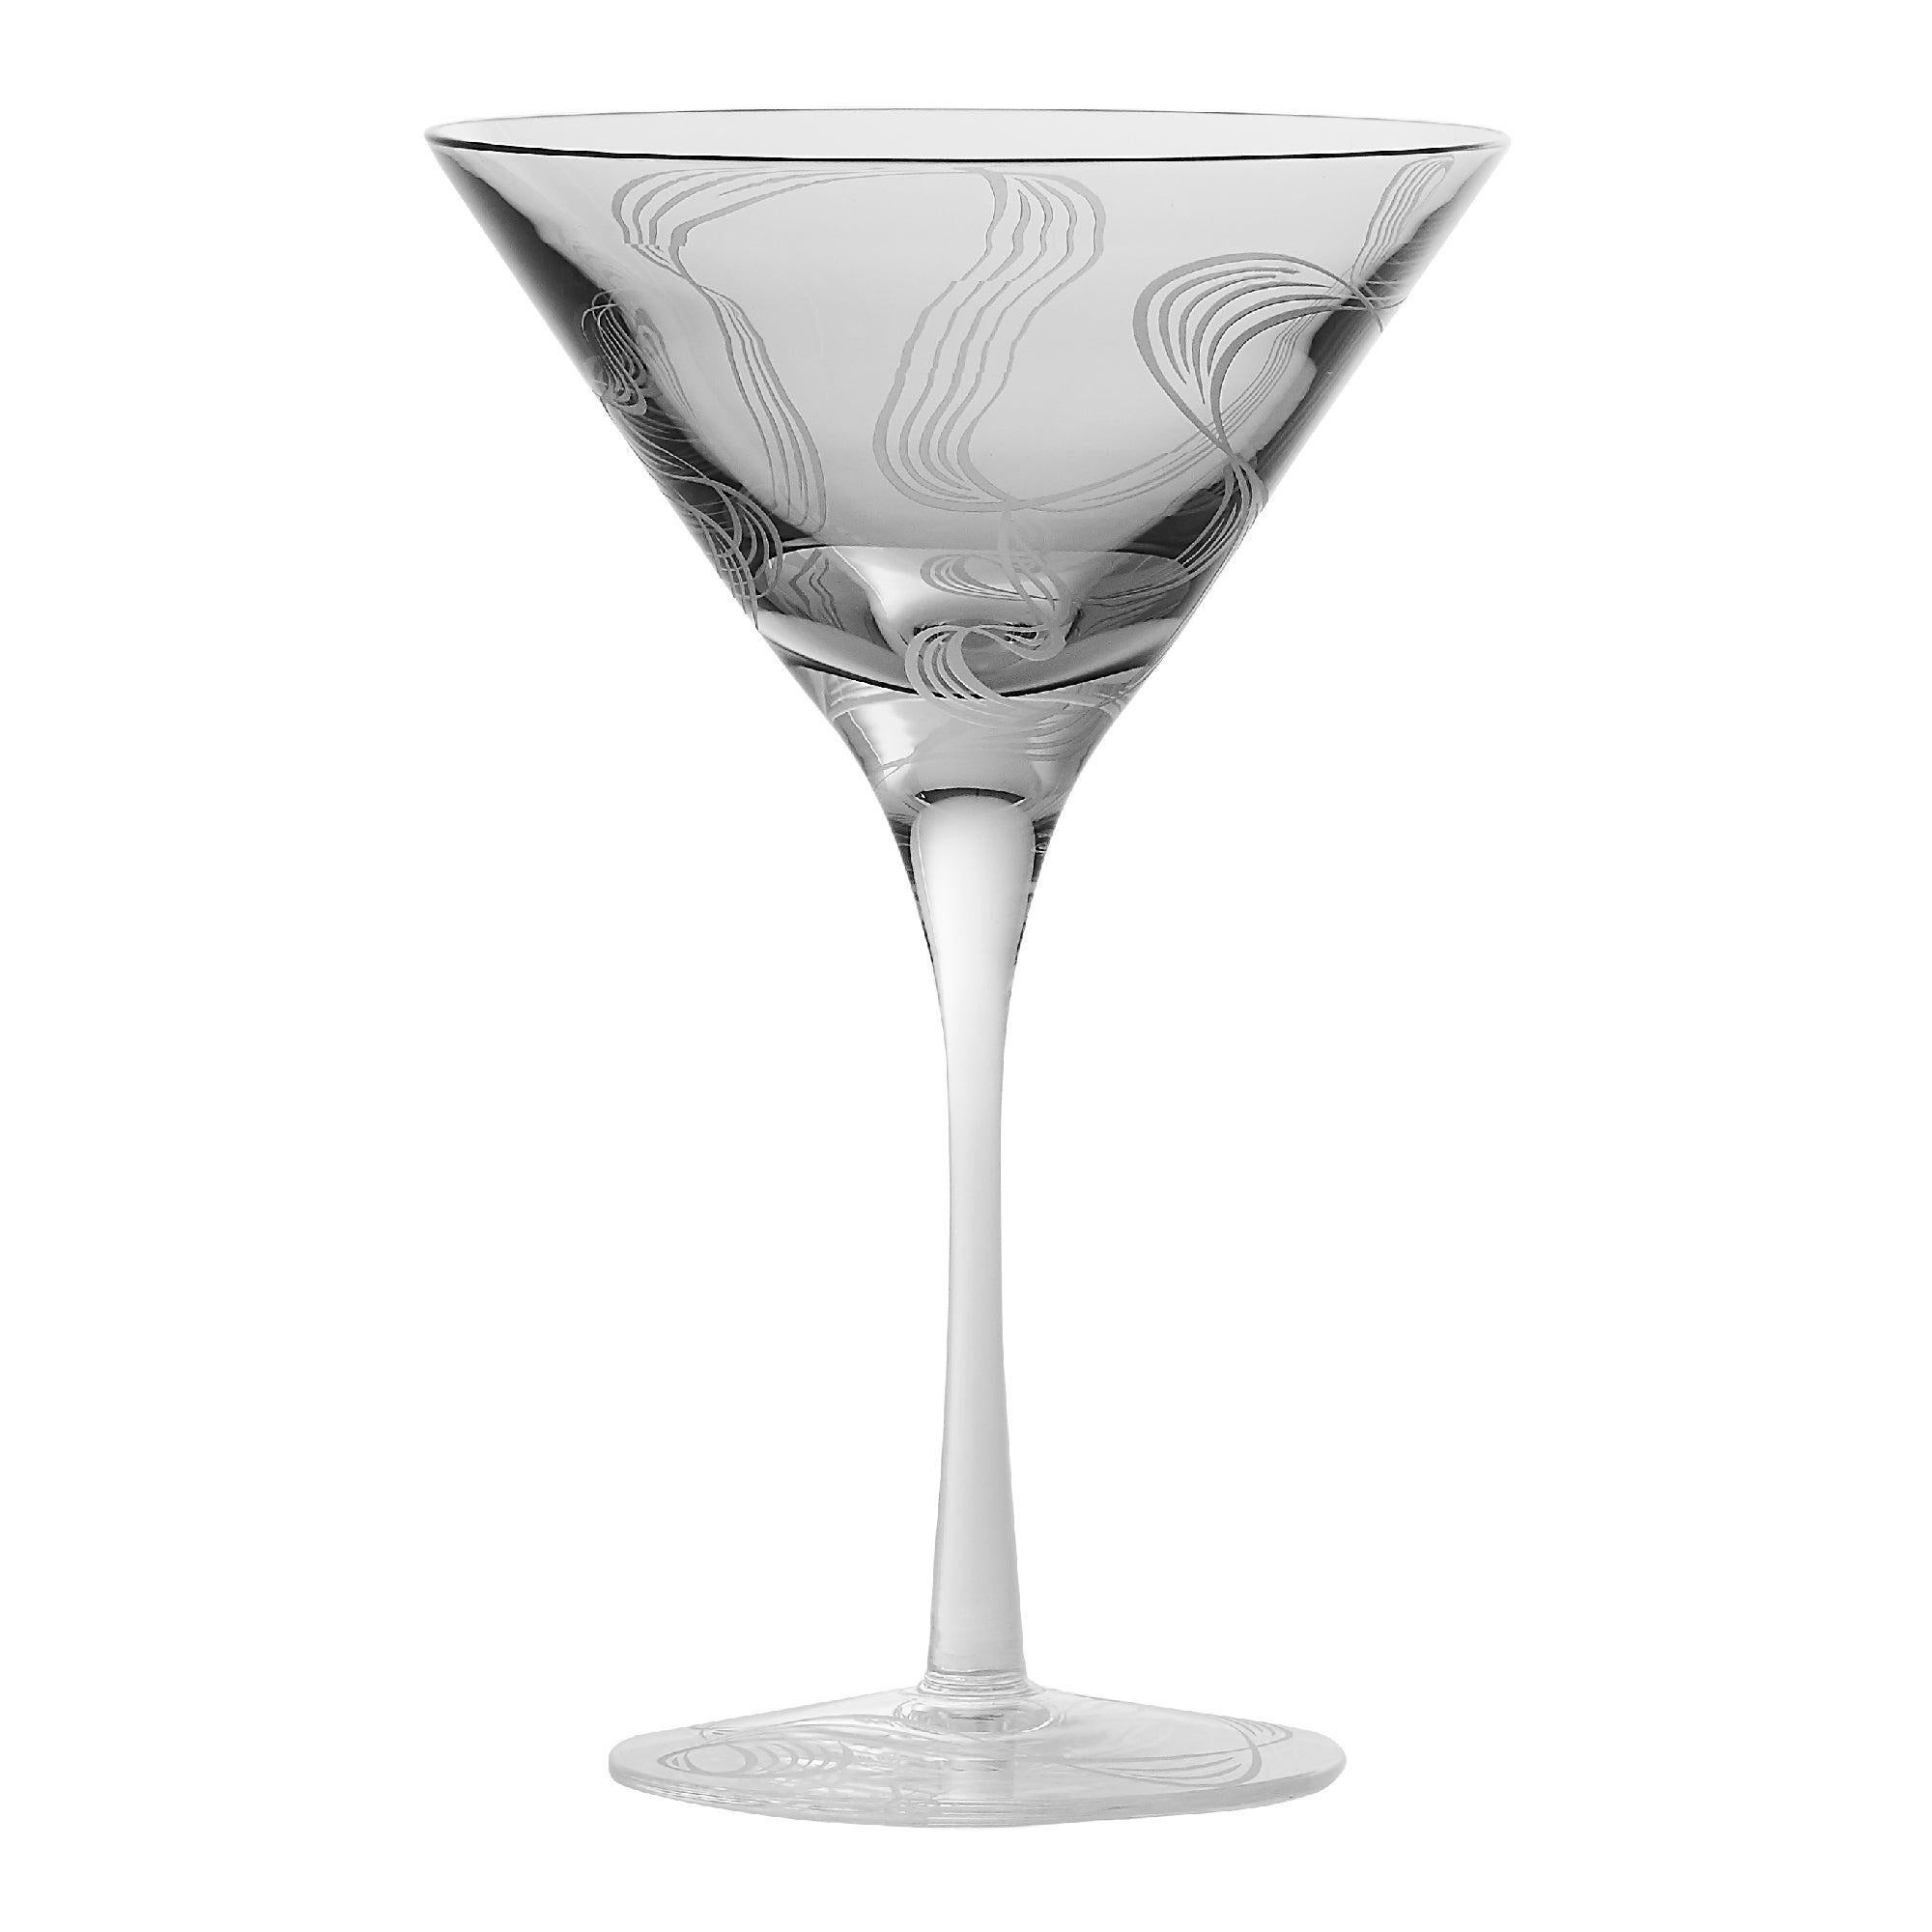 Stephen Webster Russian Roulette Smoking Gun Martini Glass - Set of 2 For Sale